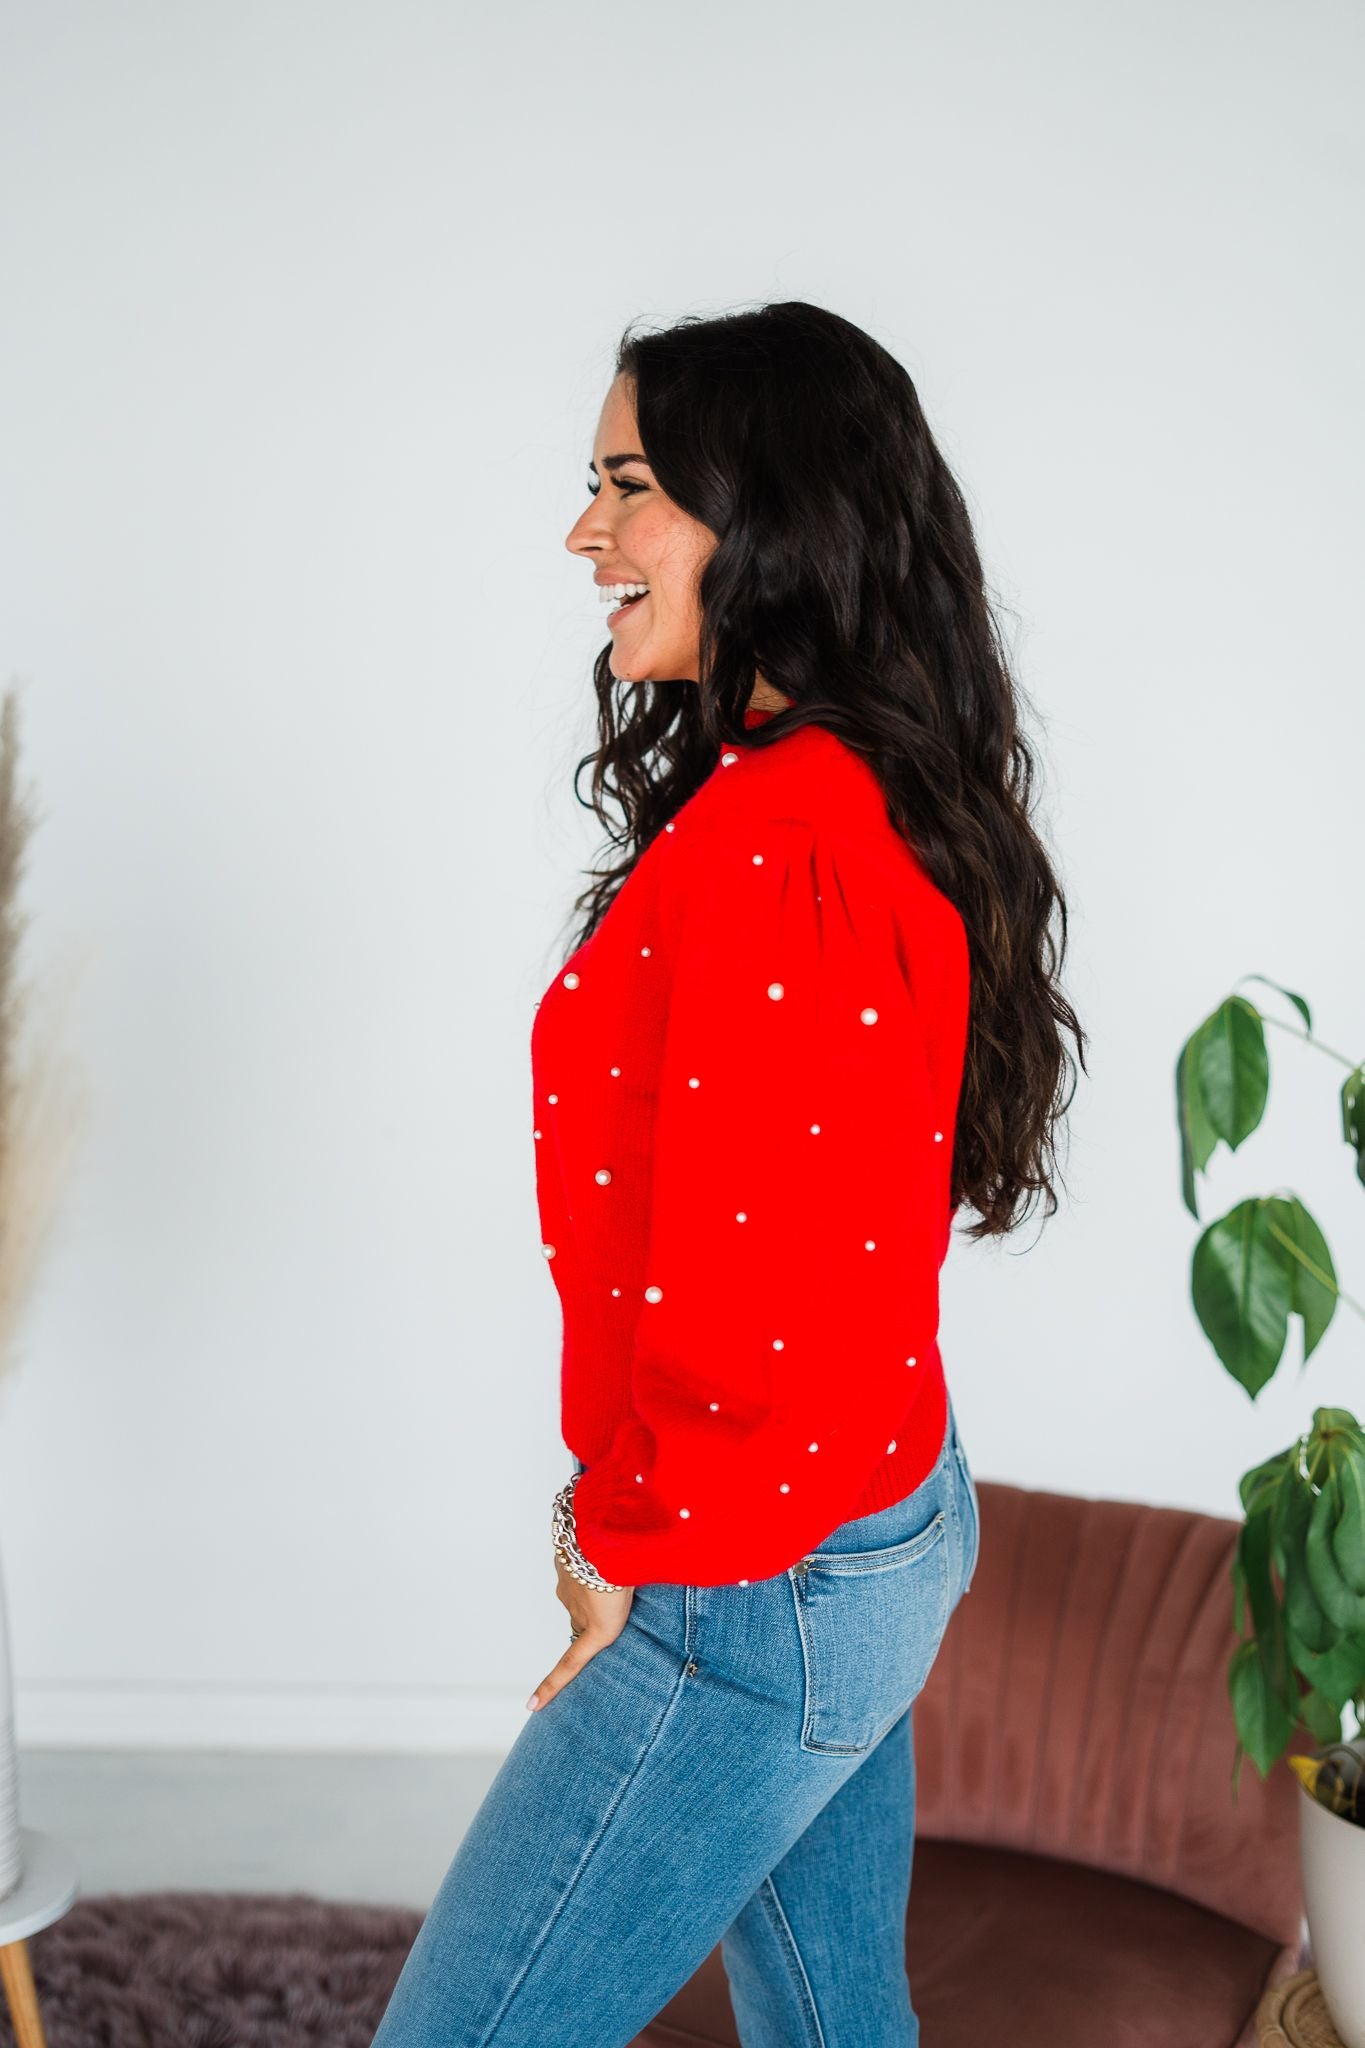 Rubies And Pearls Sweater